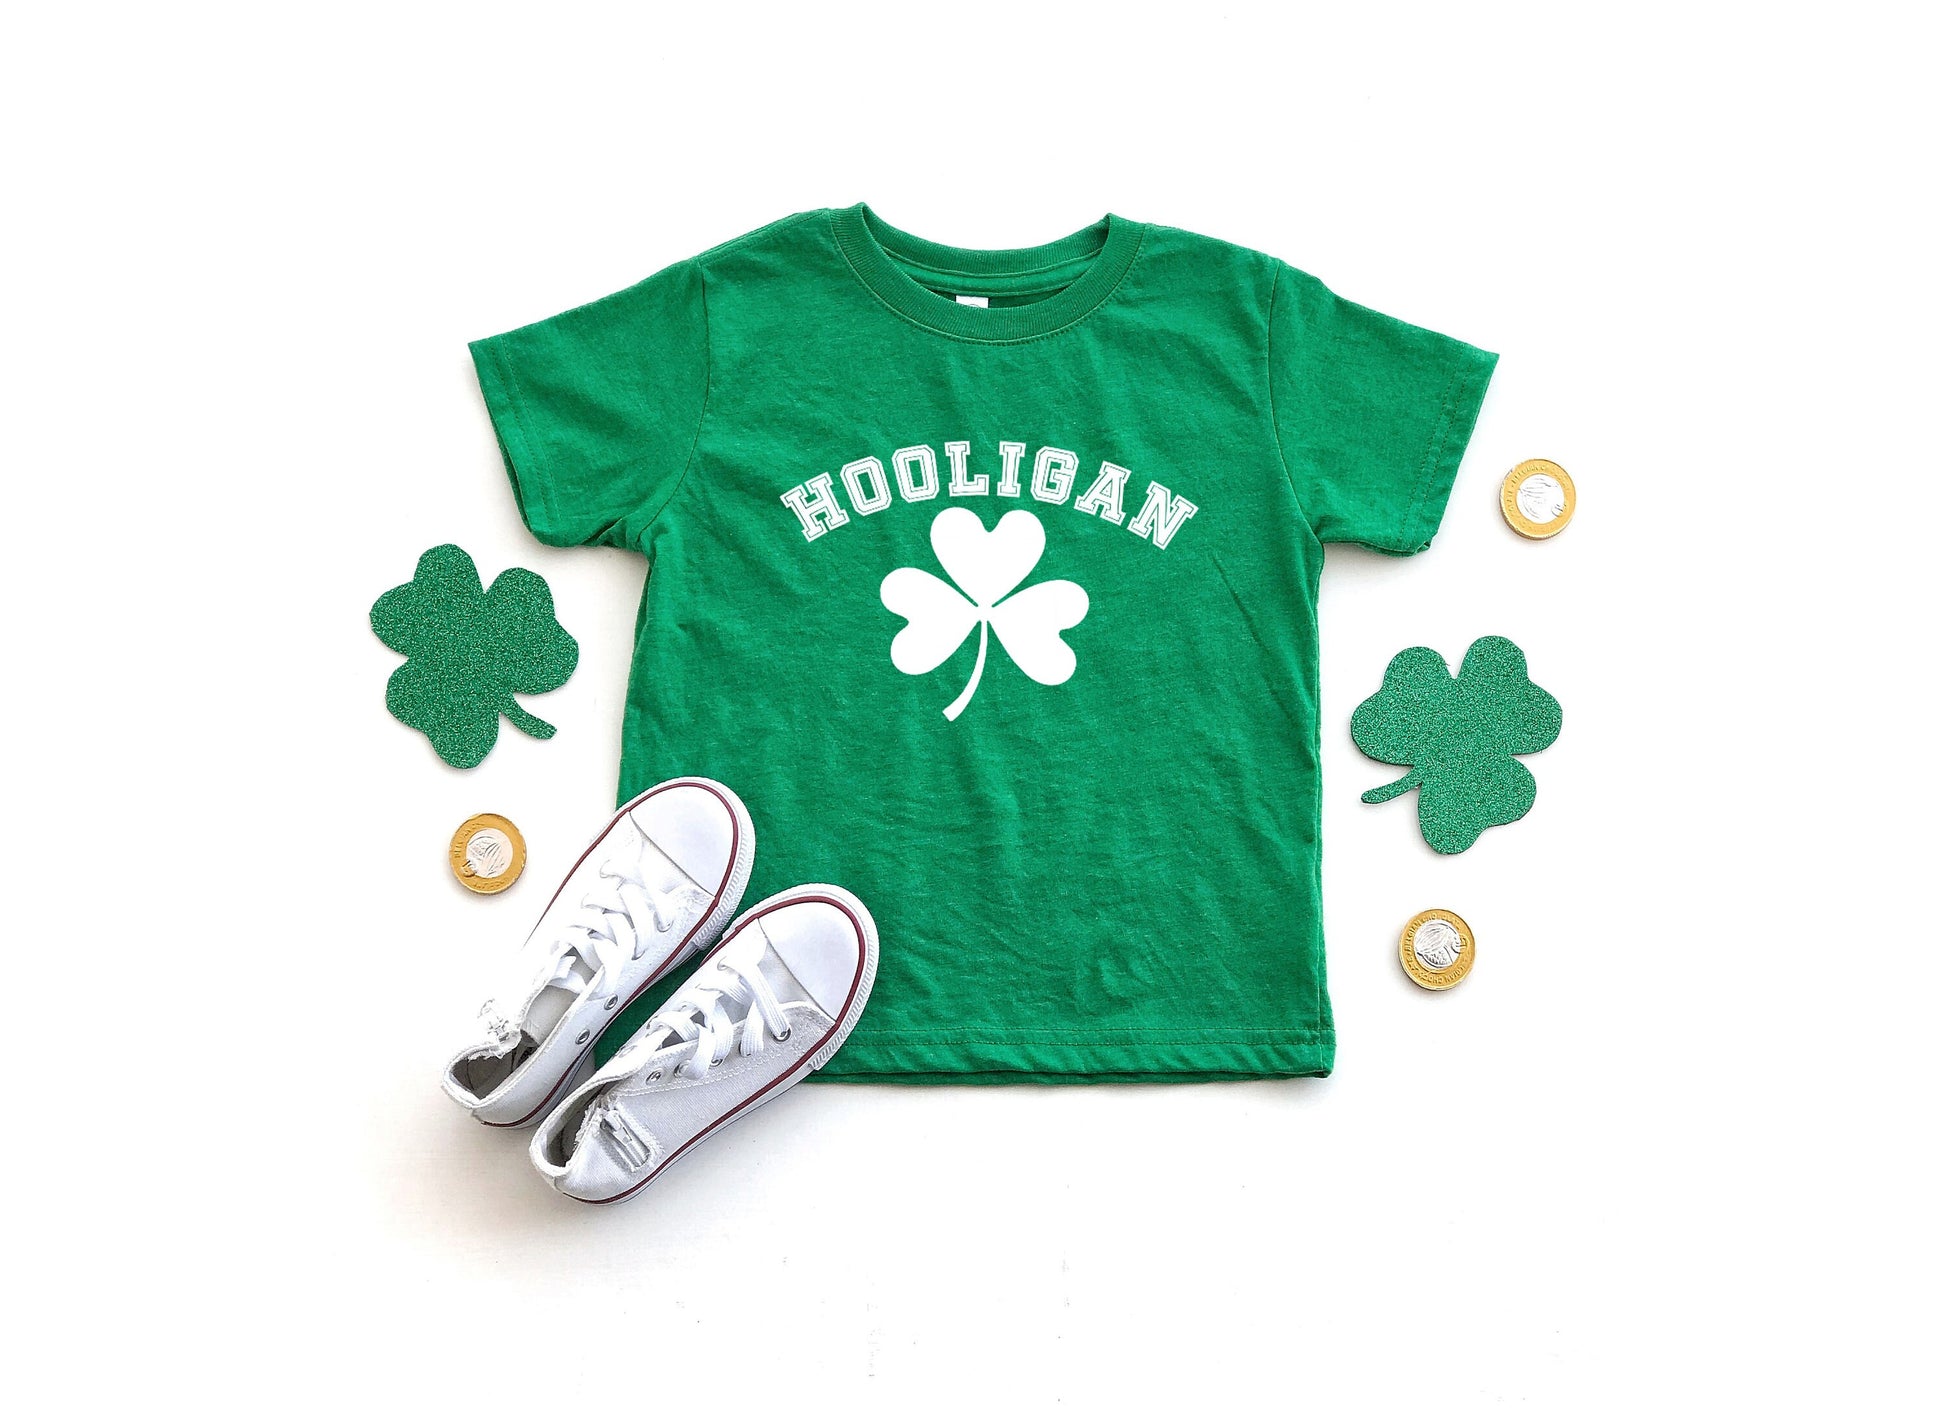 Hooligan St Patty's Toddler or Youth Shirt - st pattys day boy shirt - twin boys shirts - boys st patrick's day shirts